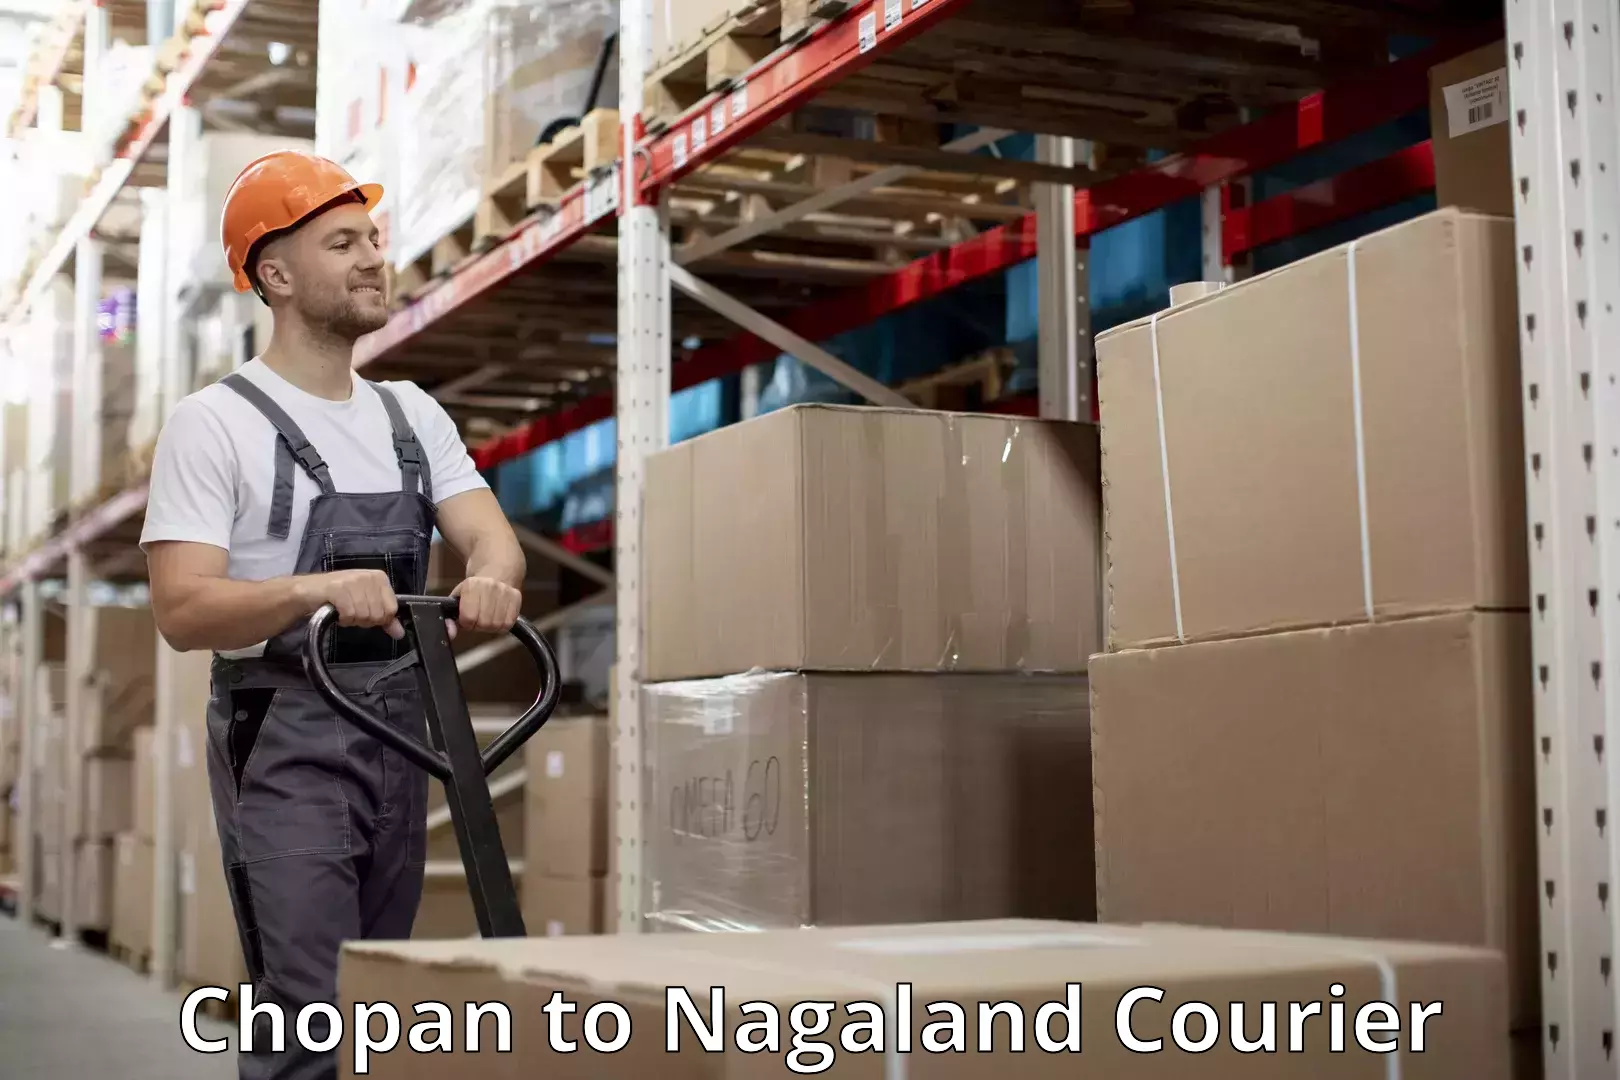 Luggage delivery app Chopan to Nagaland